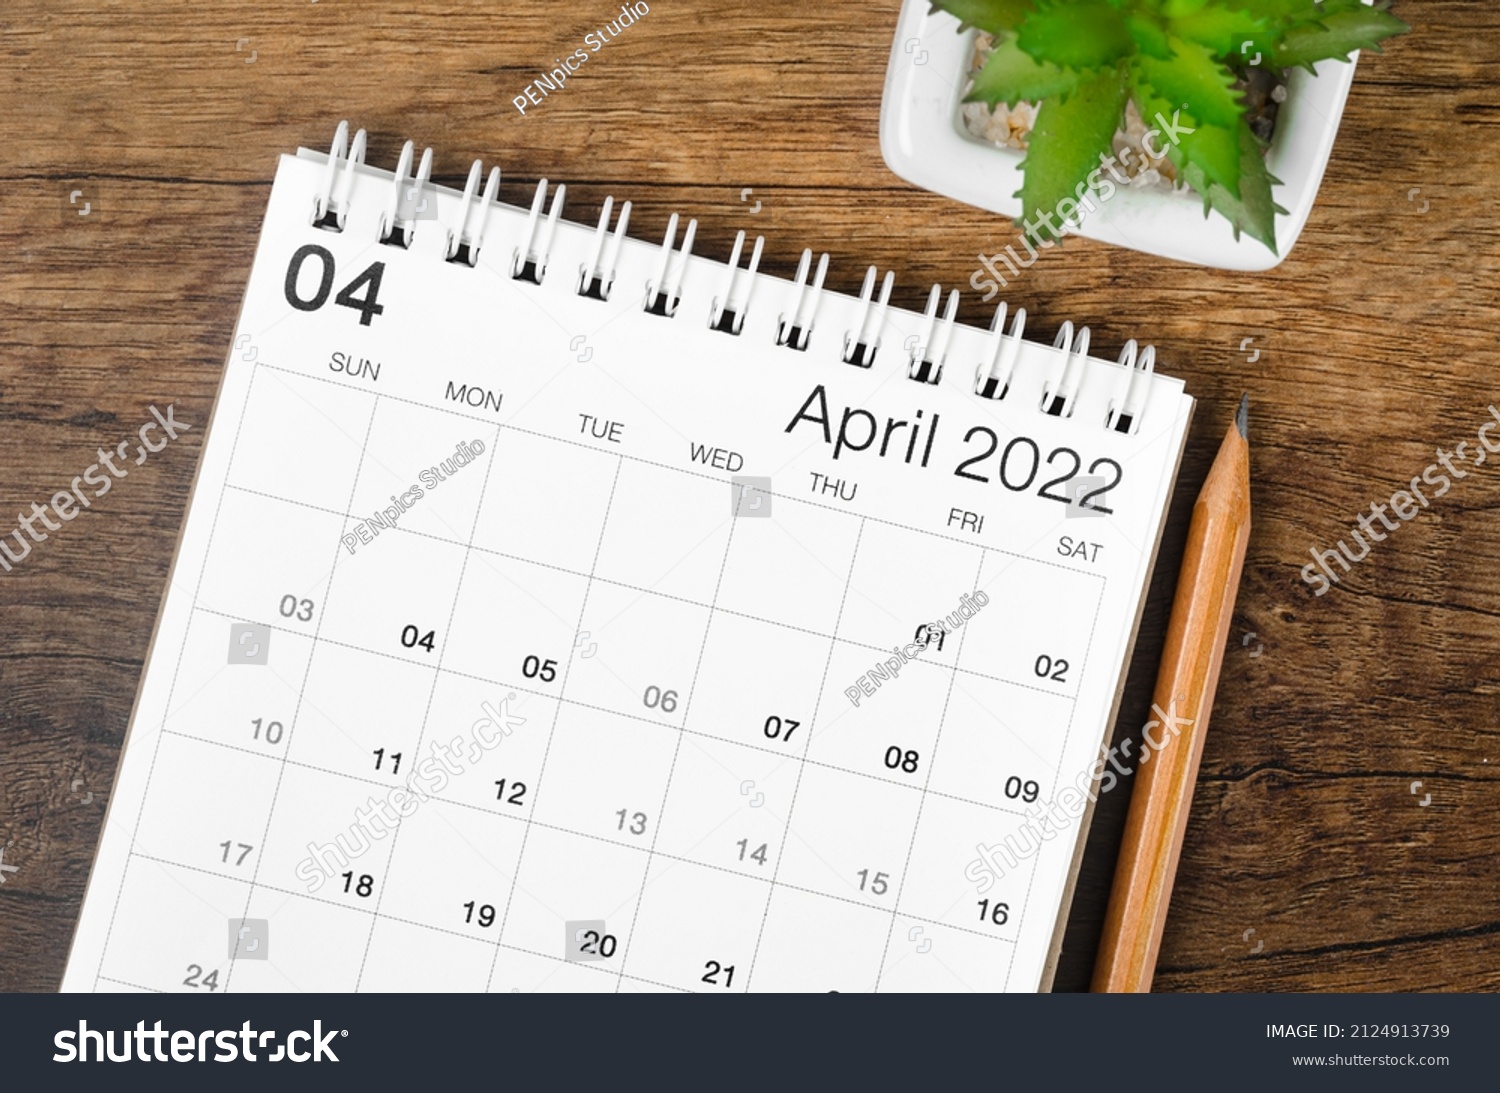 The April 2022 desk calendar with plant on wooden table. #2124913739